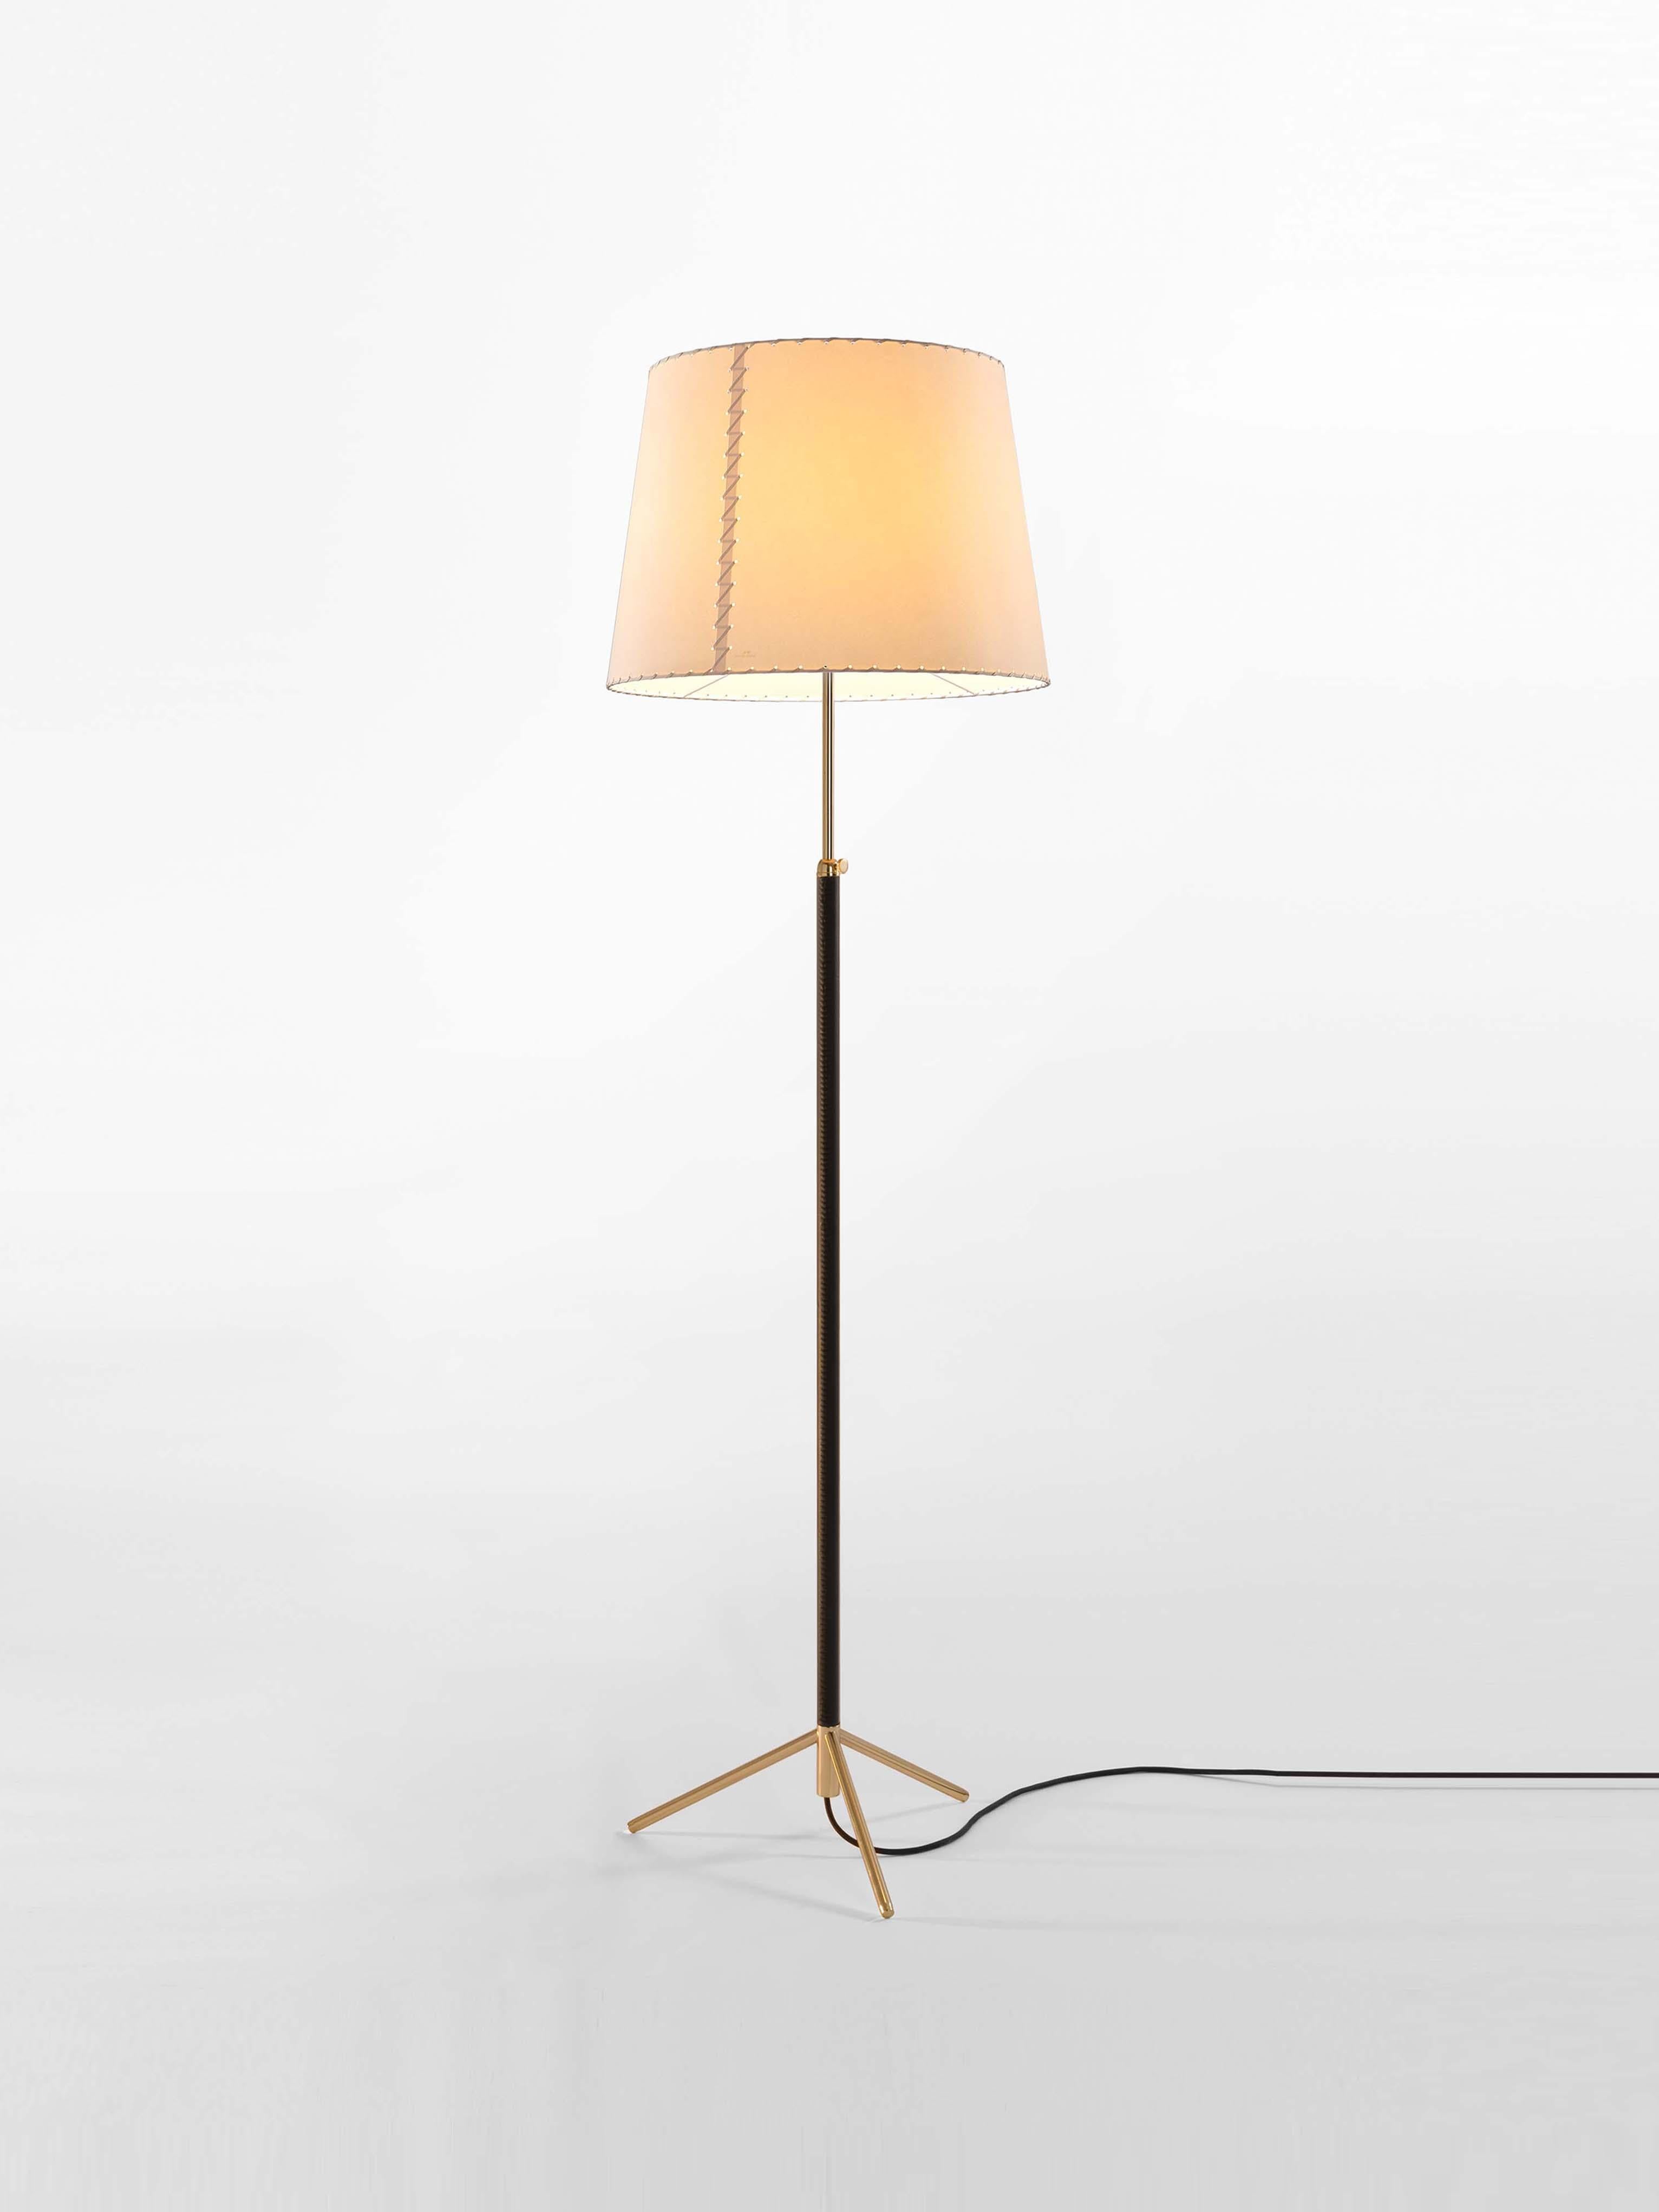 Beige and brass Pie de Salón G1 floor lamp by Jaume Sans
Dimensions: D 45 x H 120-160 cm
Materials: Metal, leather, stitched parchment.
Available in chrome-plated or polished brass structure.
Available in other shade colors and sizes.

This